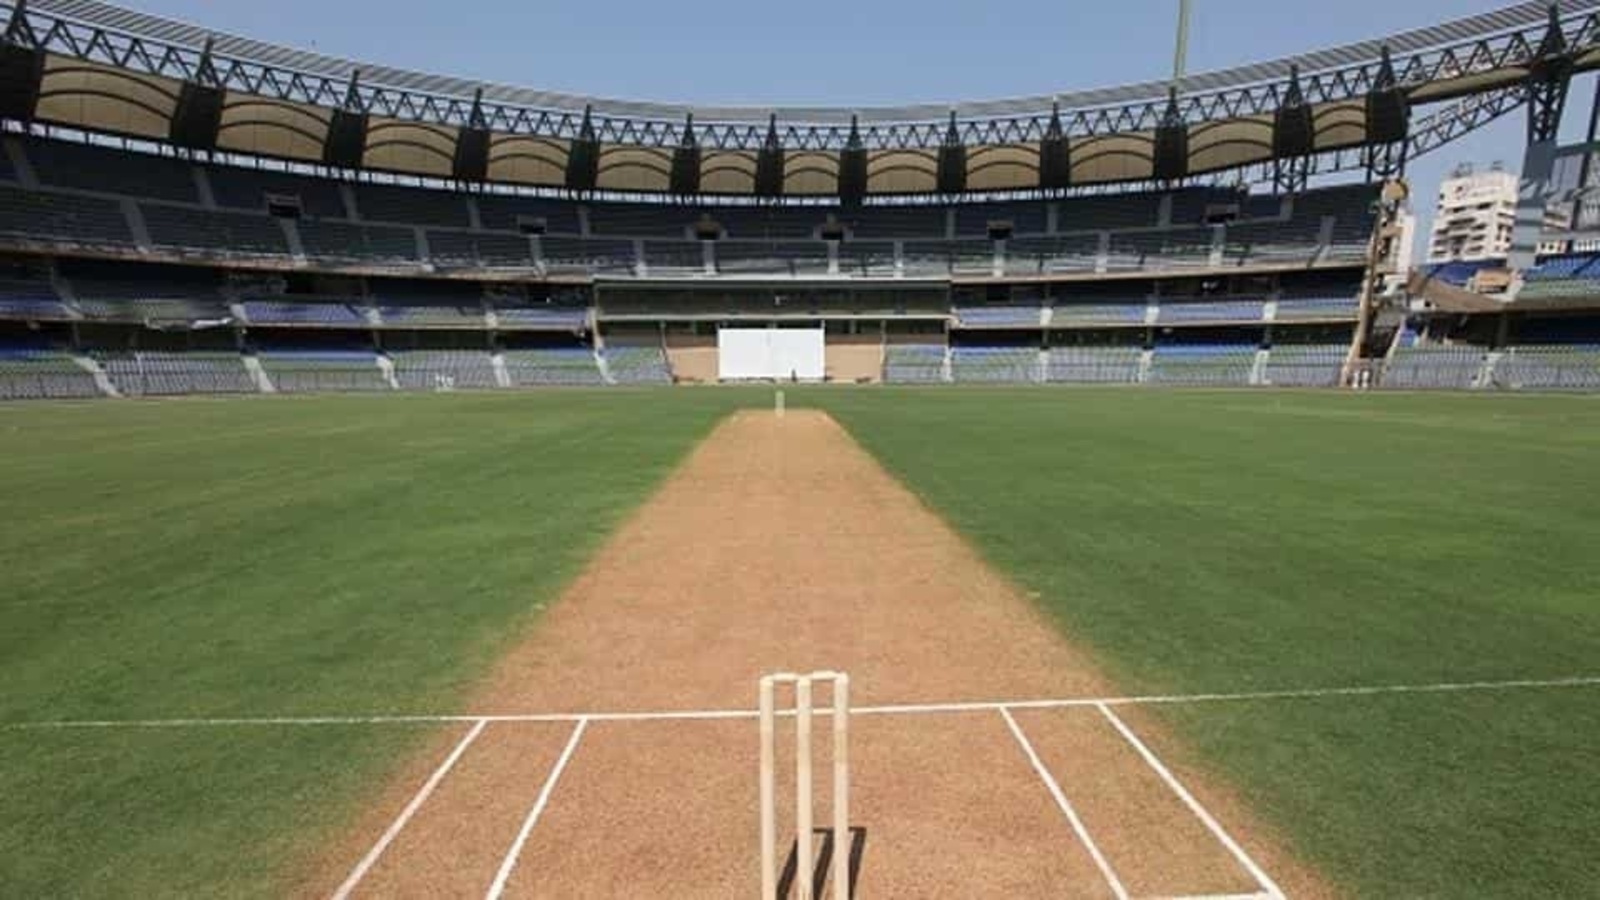 IPL 2021: Hyderabad and Indore on standby amid rising Covid-19 cases in Mumbai | Cricket - Hindustan Times